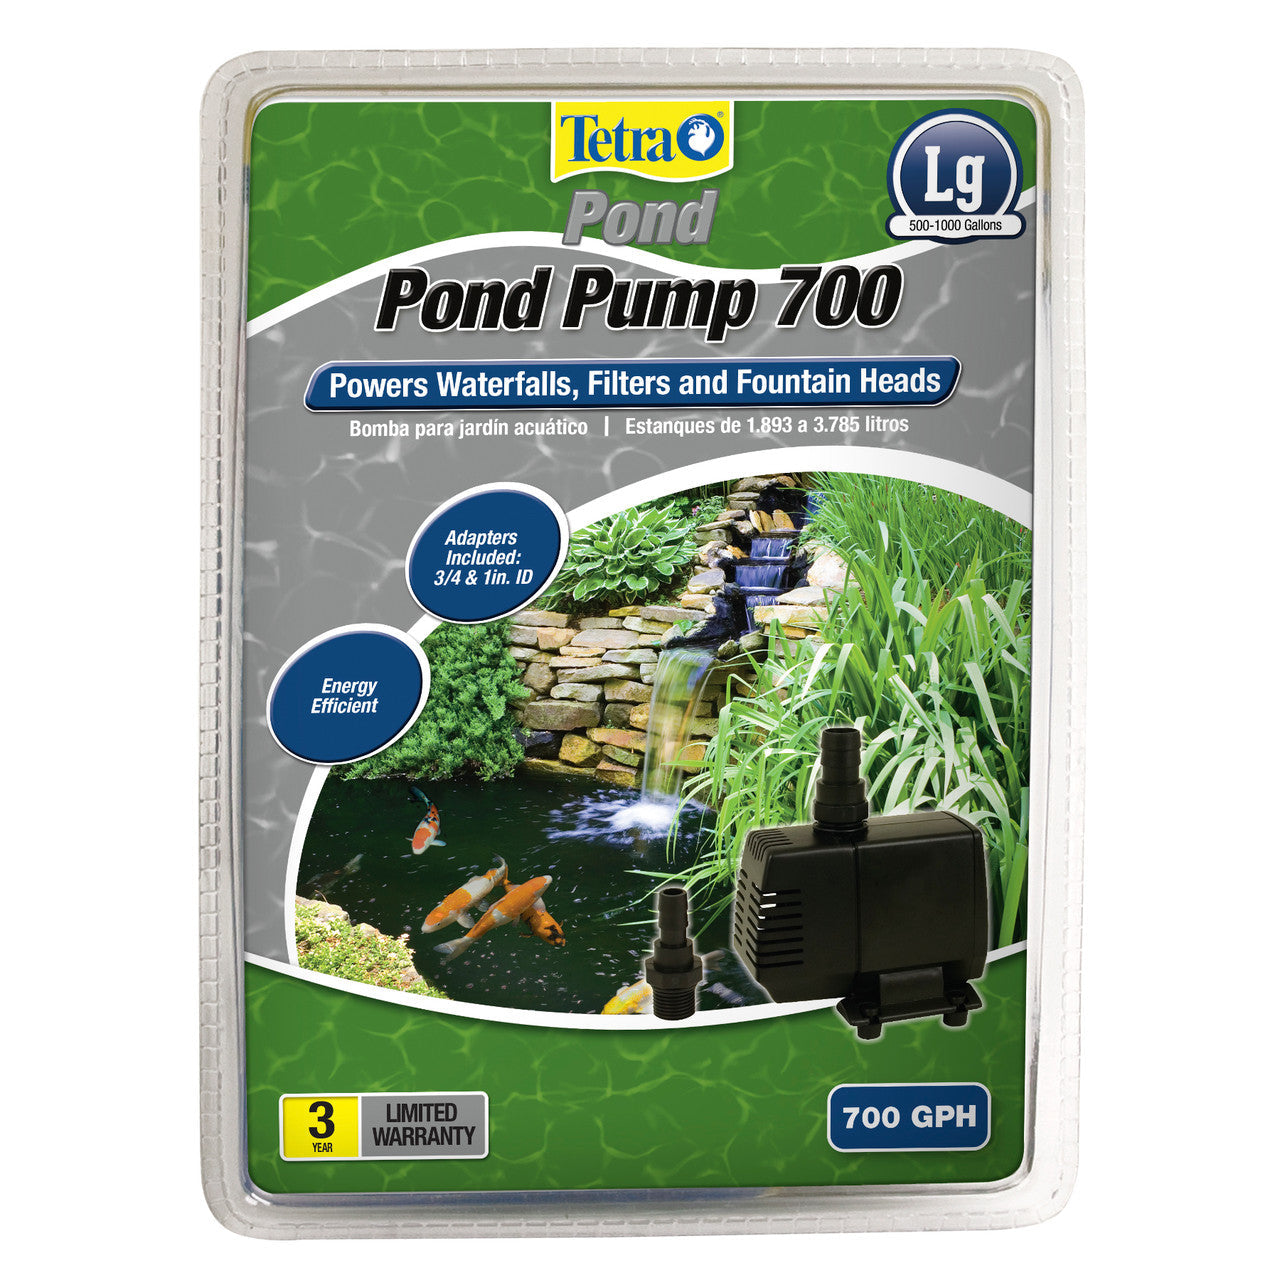 Tetra Water Garden Pump 700 for Waterfalls, Filters, and Fountain Heads Black 700 GPH